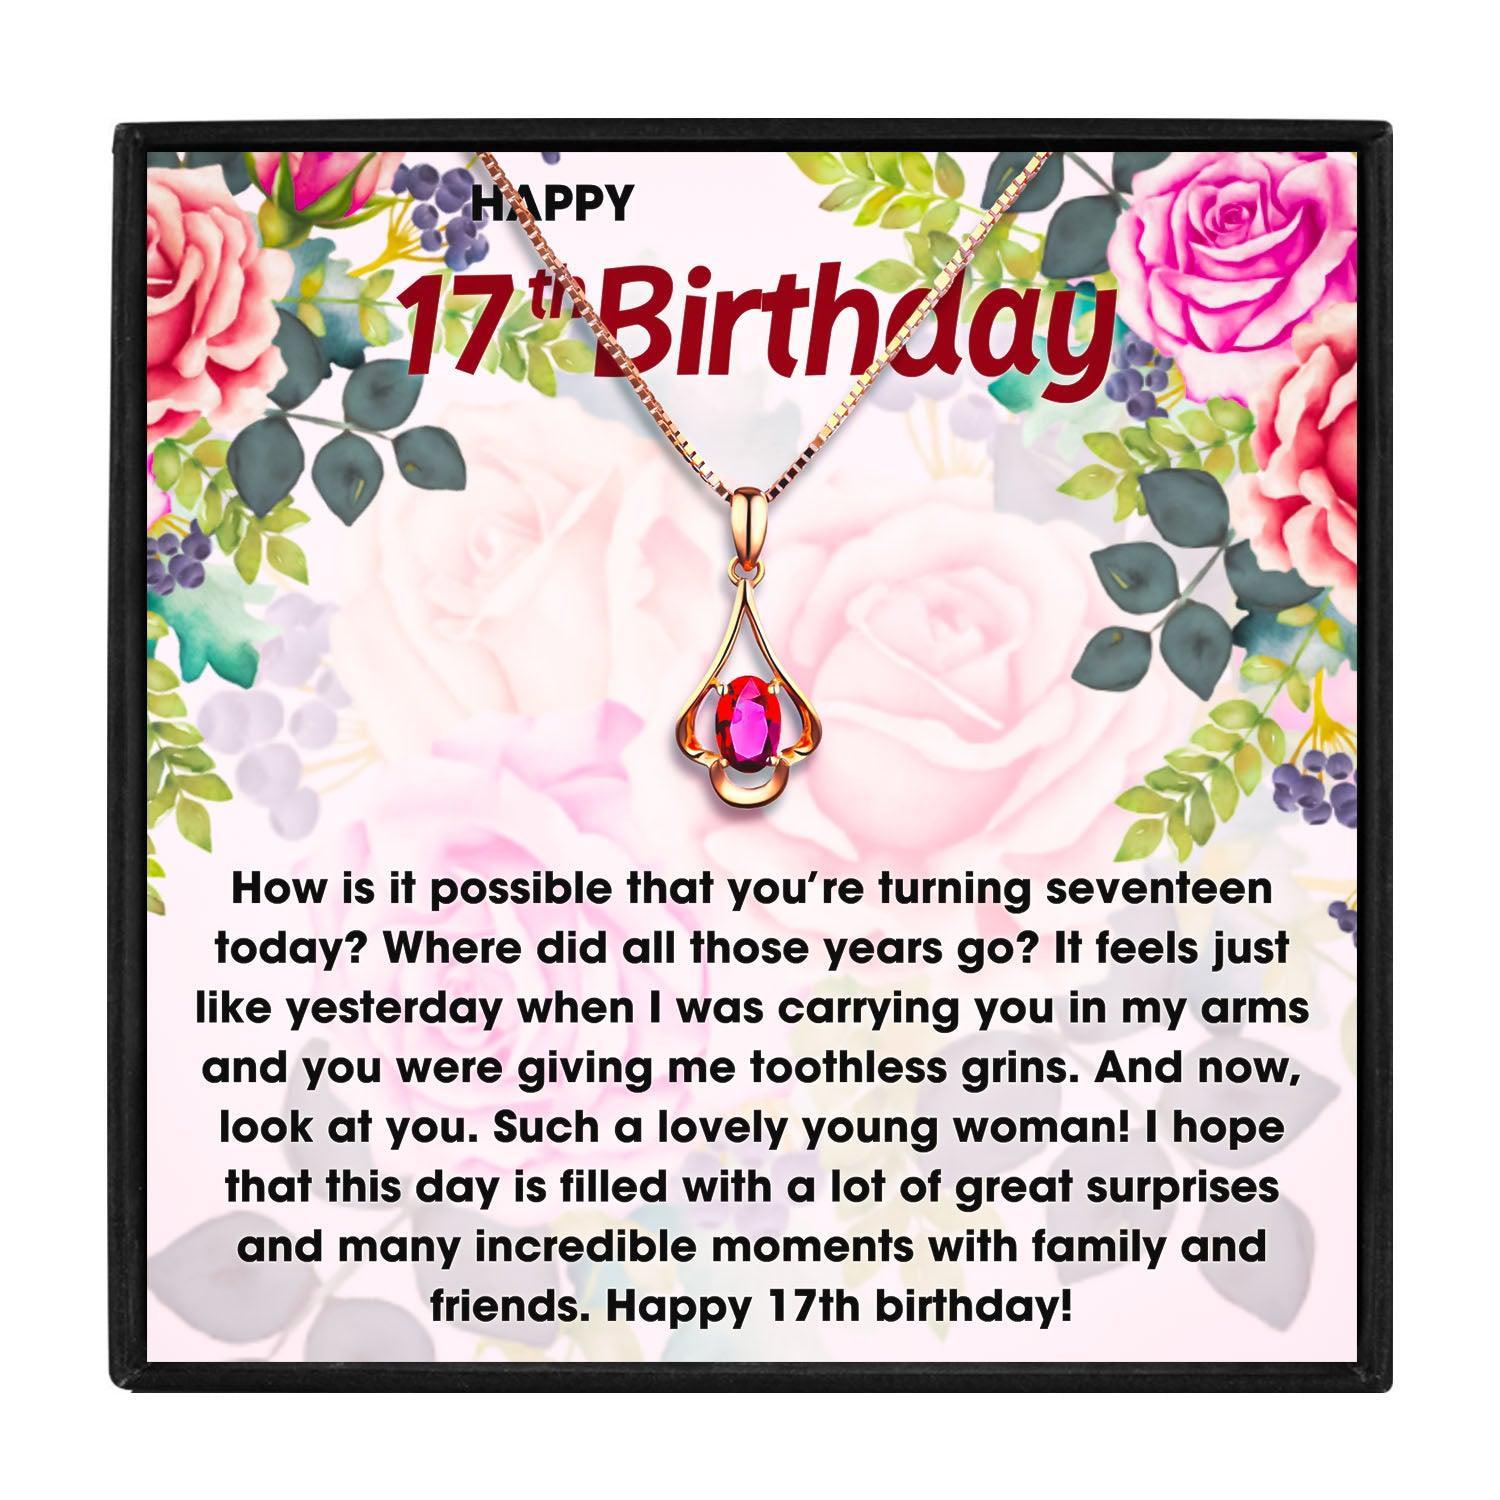 Gifts for 17 Year Old Girl, 17th Birthday Gifts for Girls, Birthday Gifts for 17 Year Old Girl, 17 Year Old Girl Gift Ideas, Happy 17th Birthday